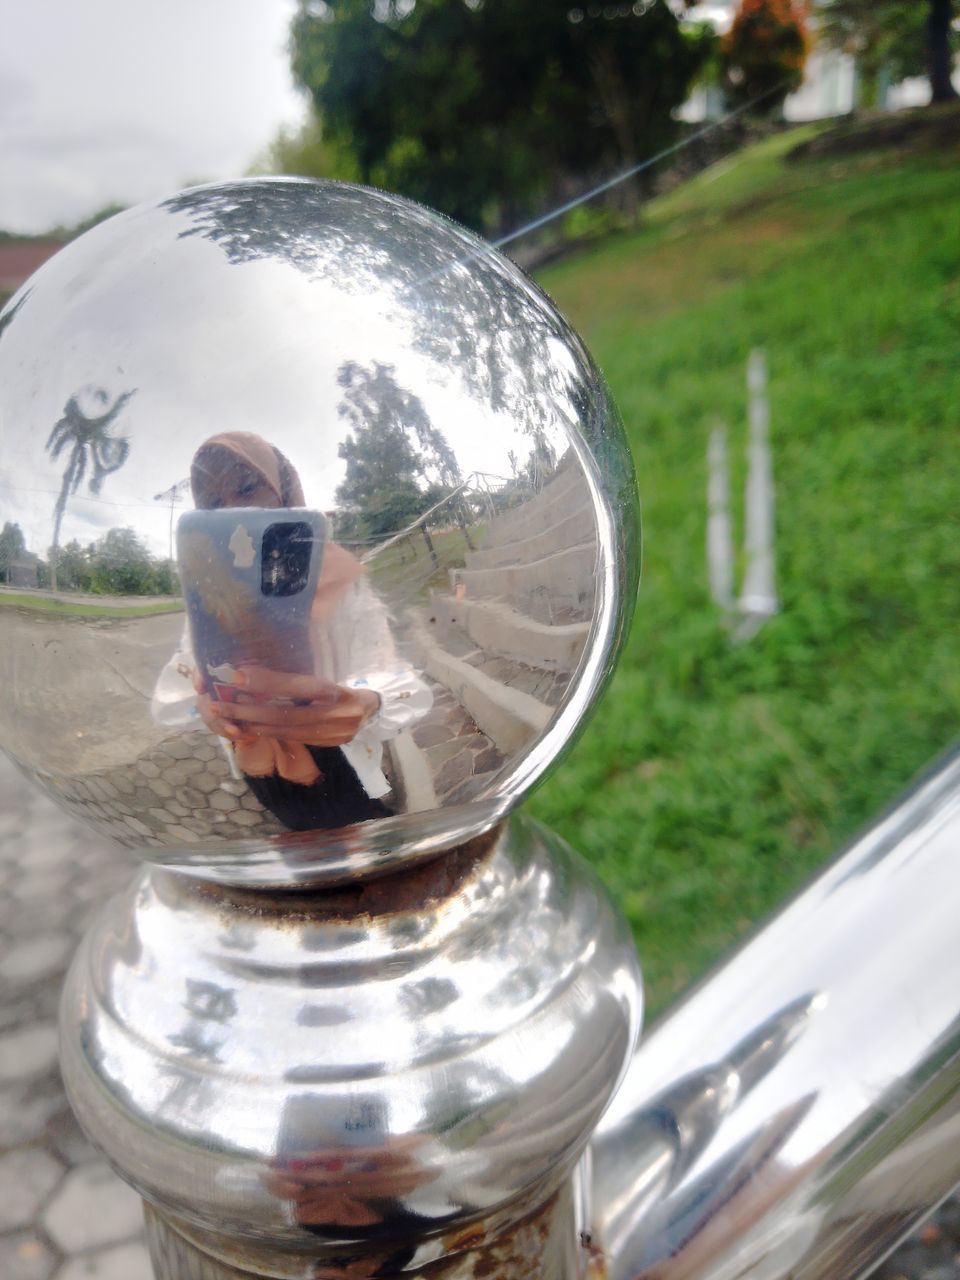 reflection, sphere, nature, day, silver, outdoors, glass, one person, shiny, metal, transparent, adult, plant, men, crystal ball, holding, focus on foreground, close-up, tree